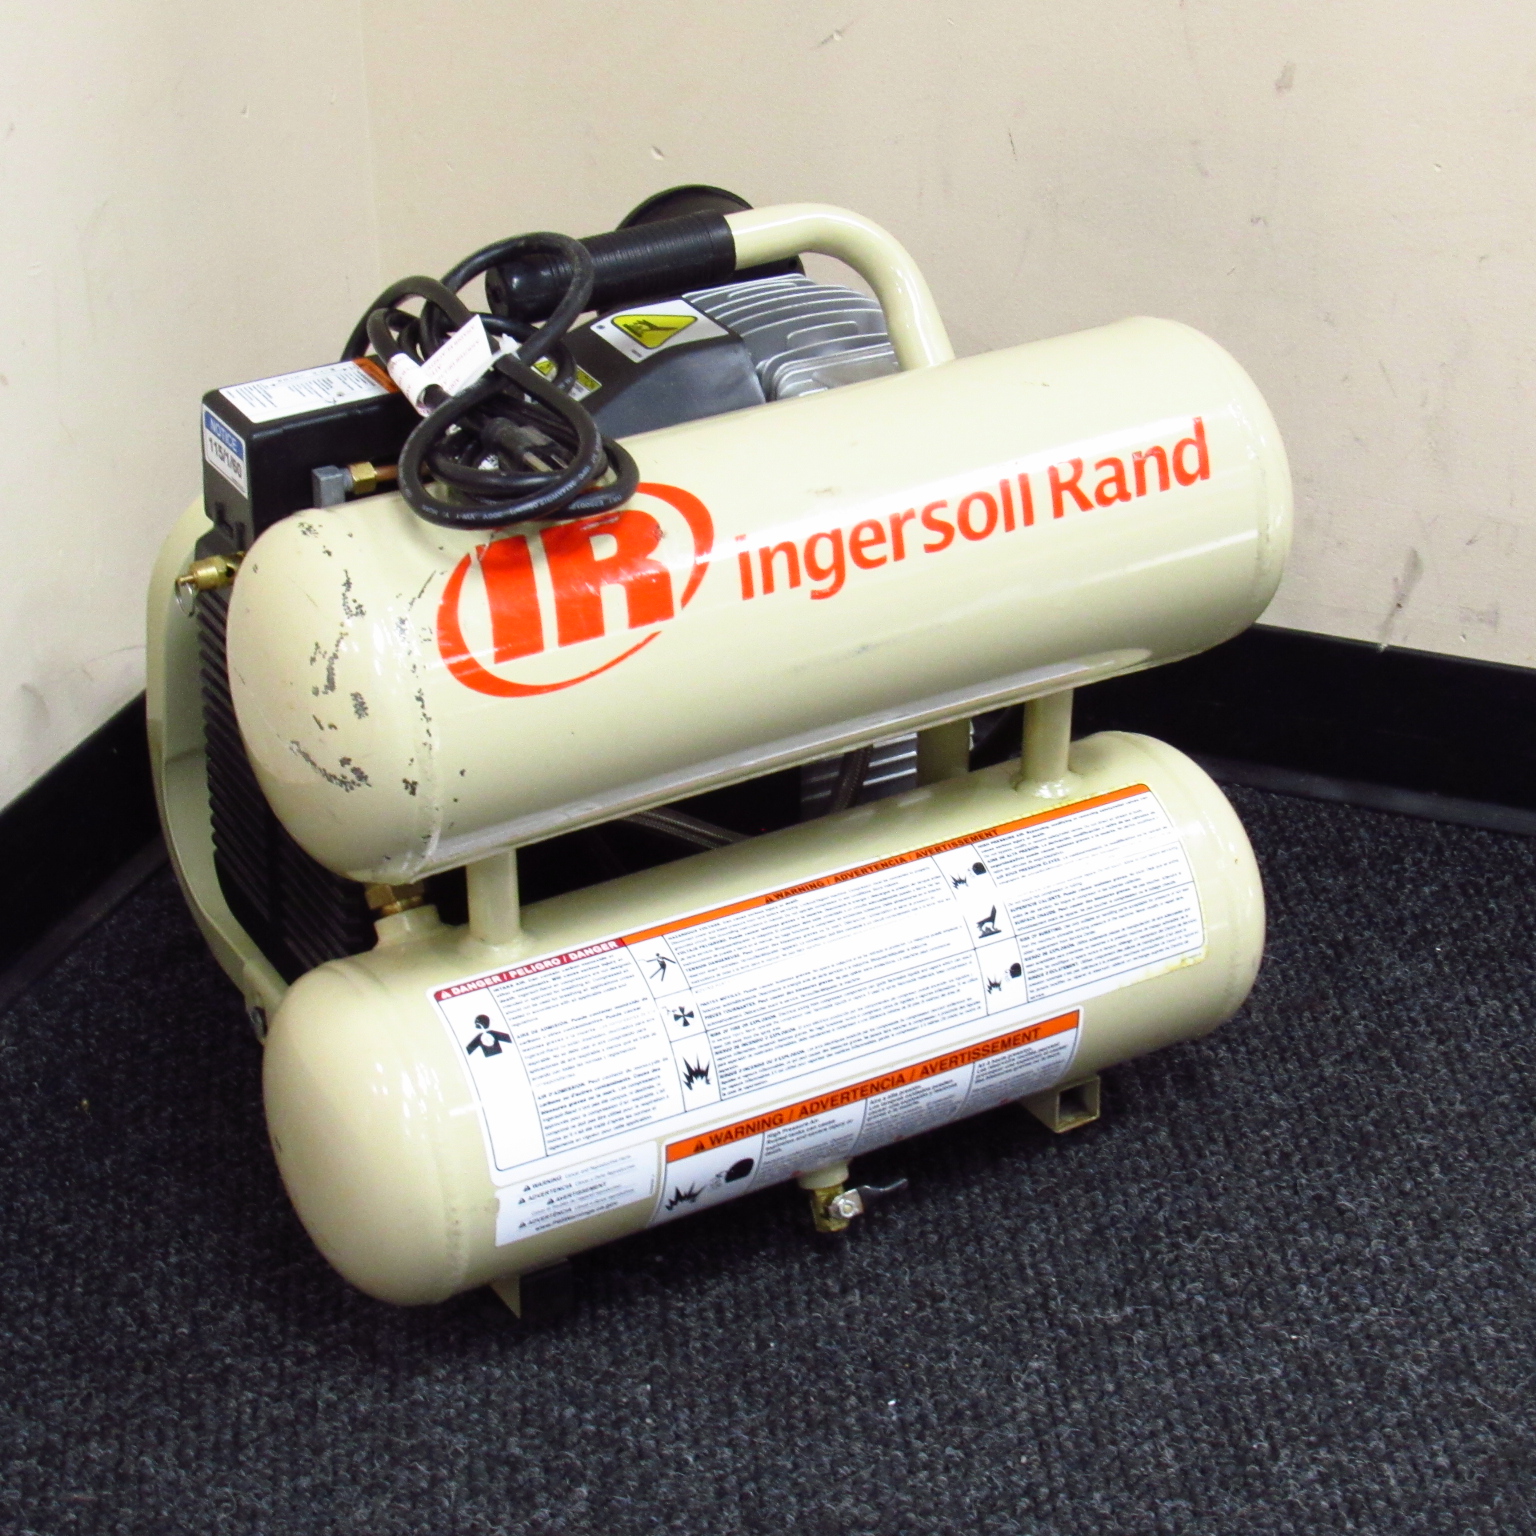 Ingersol Rand P1IU-A9 135-PSIG Corded Air Compressor - Local Pick-Up Only